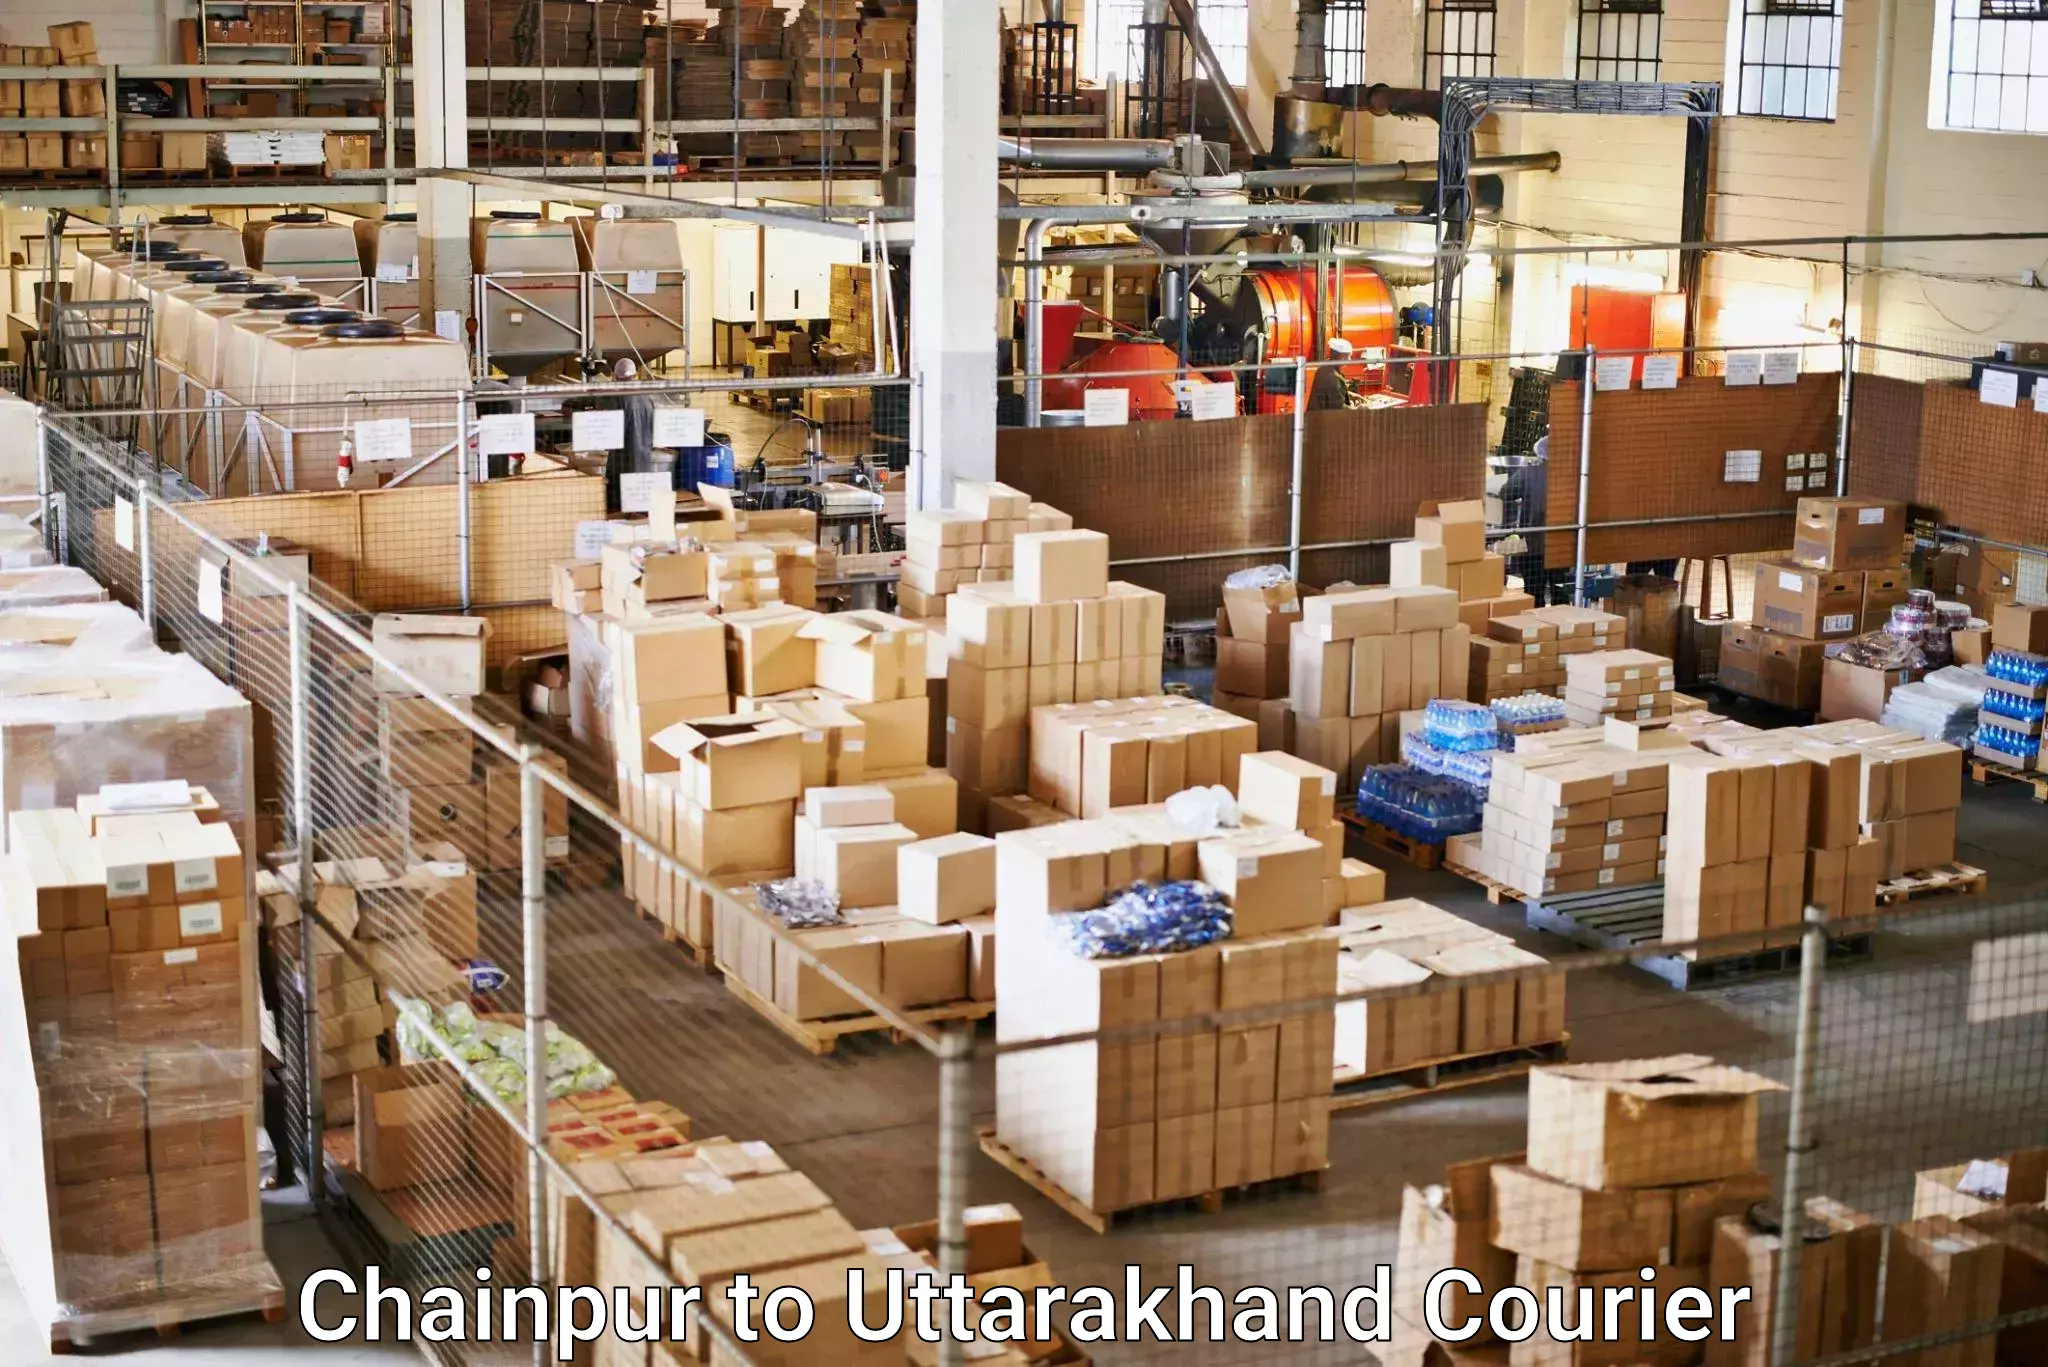 Lightweight parcel options Chainpur to Bhimtal